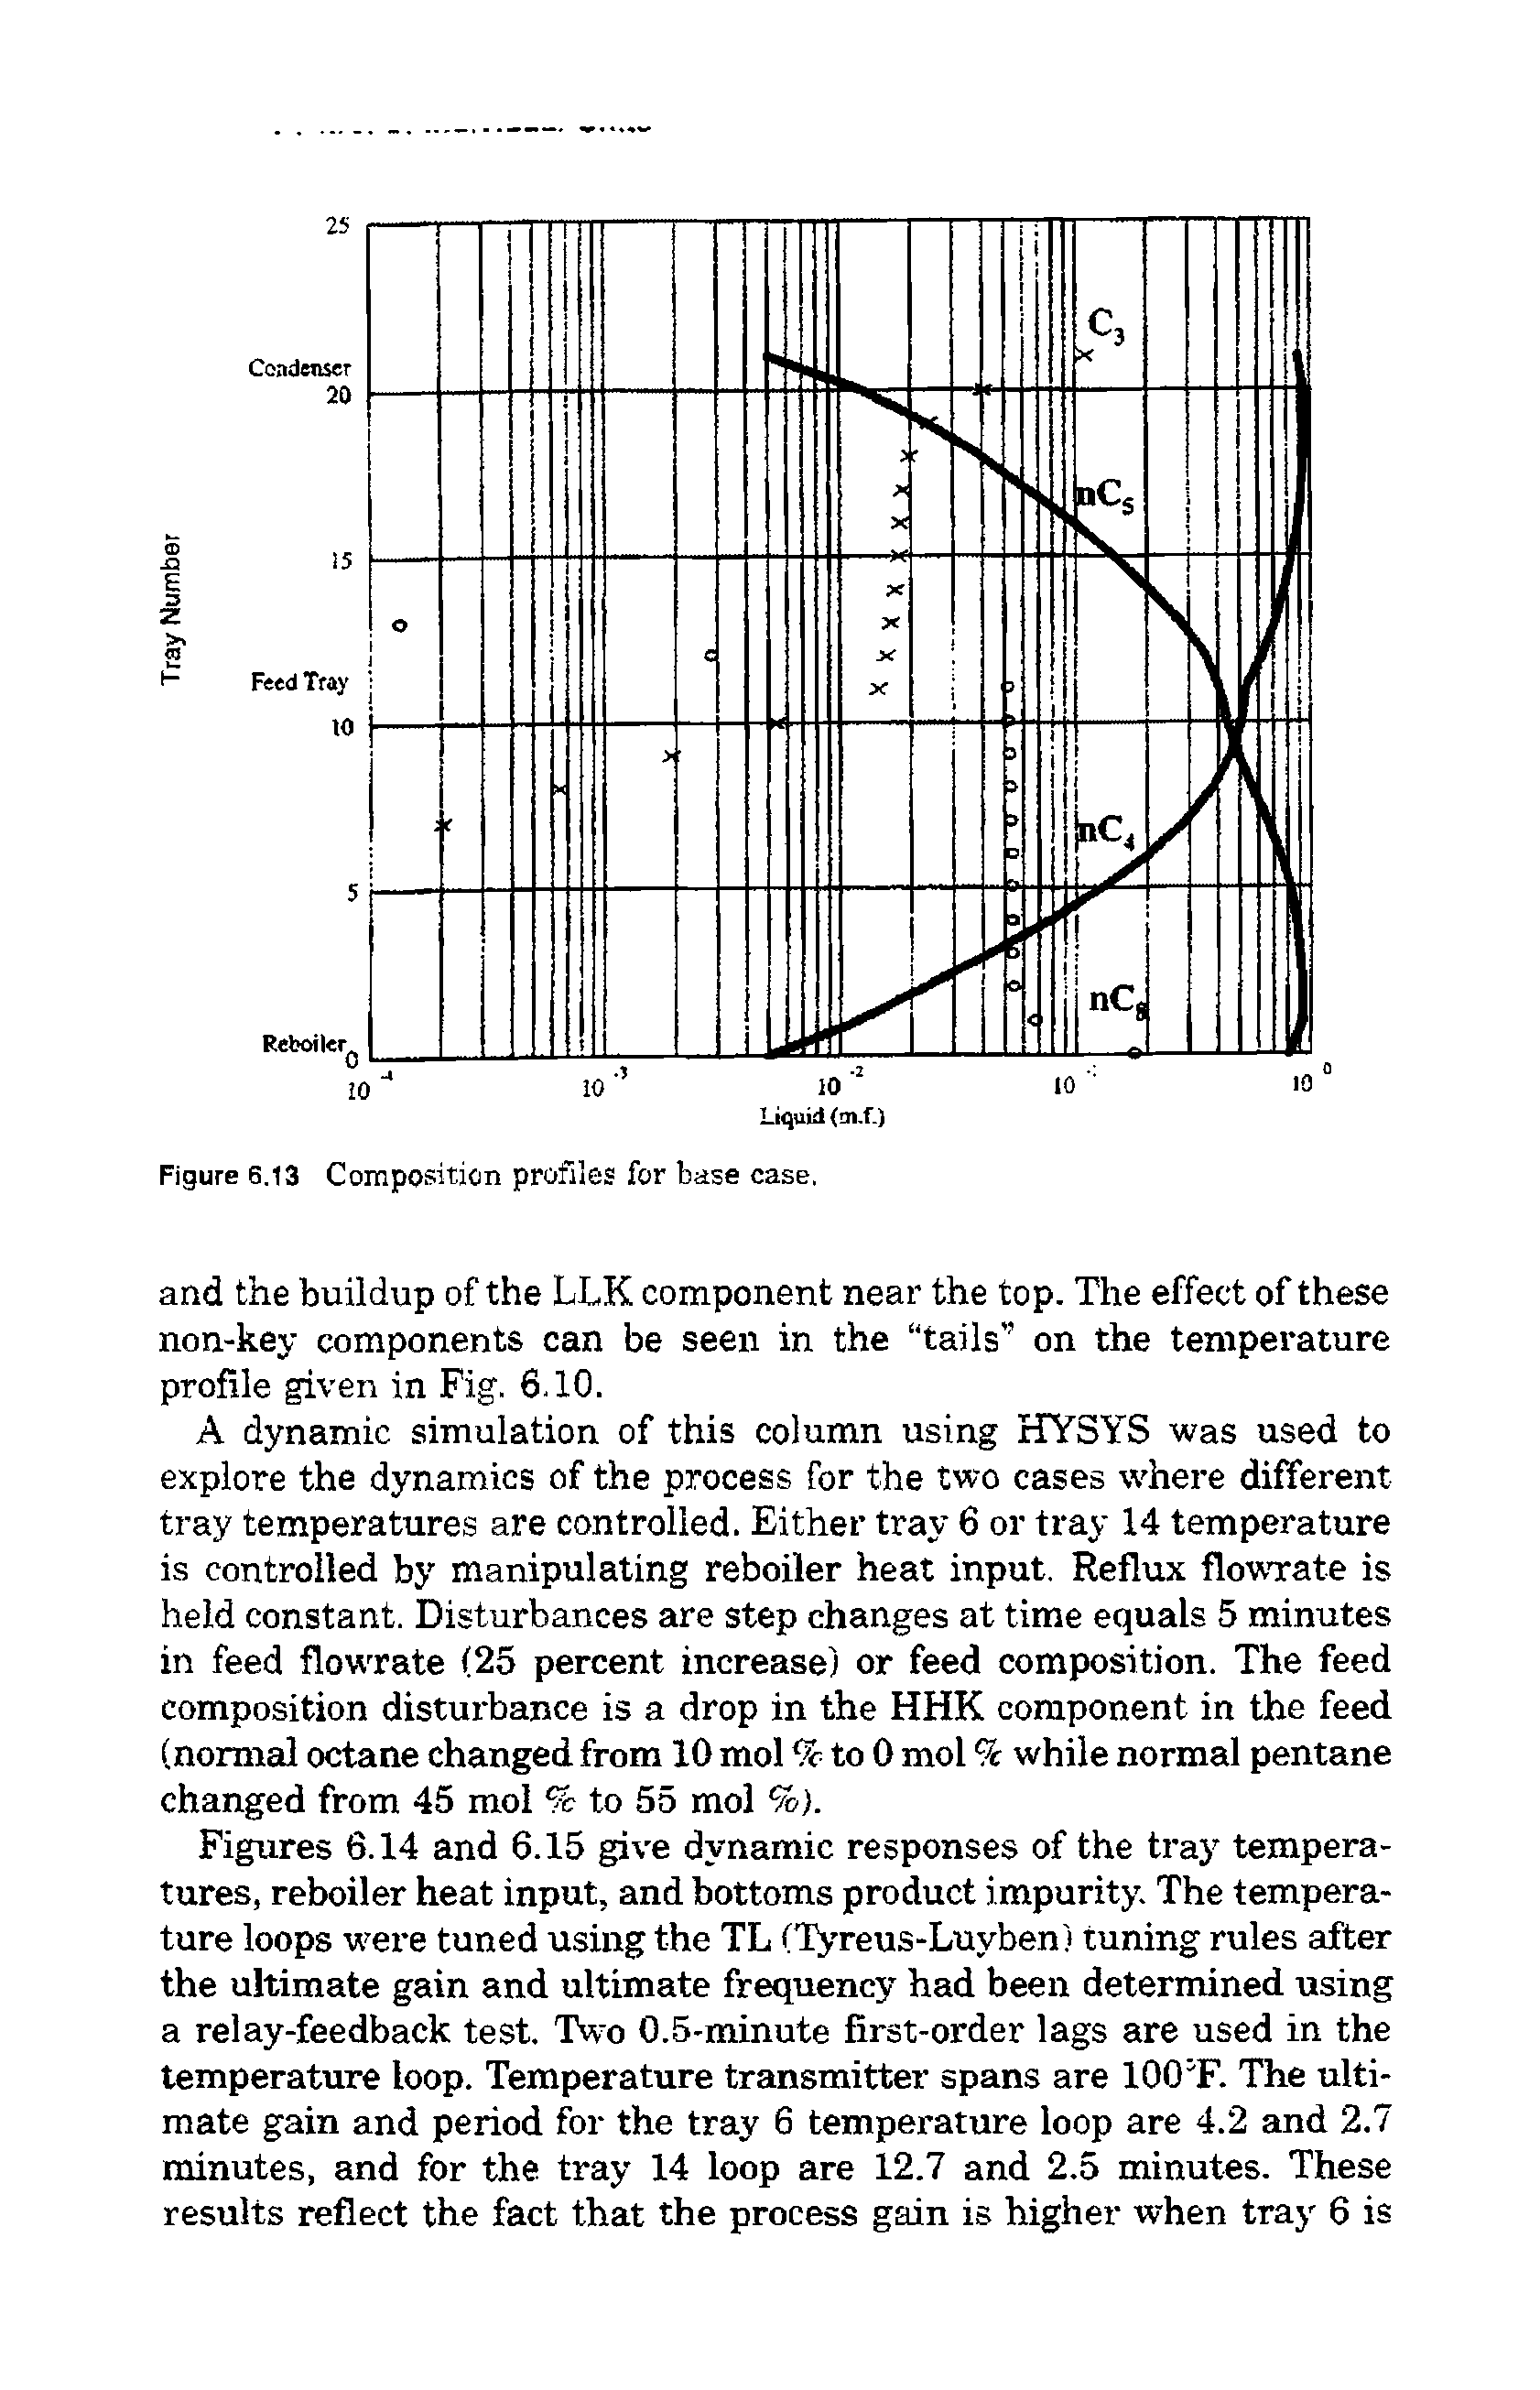 Figures 6.14 and 6.15 give dynamic responses of the tray temperatures, reboiler heat input, and bottoms product impurity. The temperature loops were tuned using the TL (Tyreus-Luyben) tuning rules after the ultimate gain and ultimate frequency had been determined using a relay-feedback test. Two 0.5-minute first-order lags are used in the temperature loop. Temperature transmitter spans are 100T. The ultimate gain and period for the tray 6 temperature loop are 4.2 and 2.7 minutes, and for the tray 14 loop are 12.7 and 2.5 minutes. These results reflect the fact that the process gain is higher when tray 6 is...